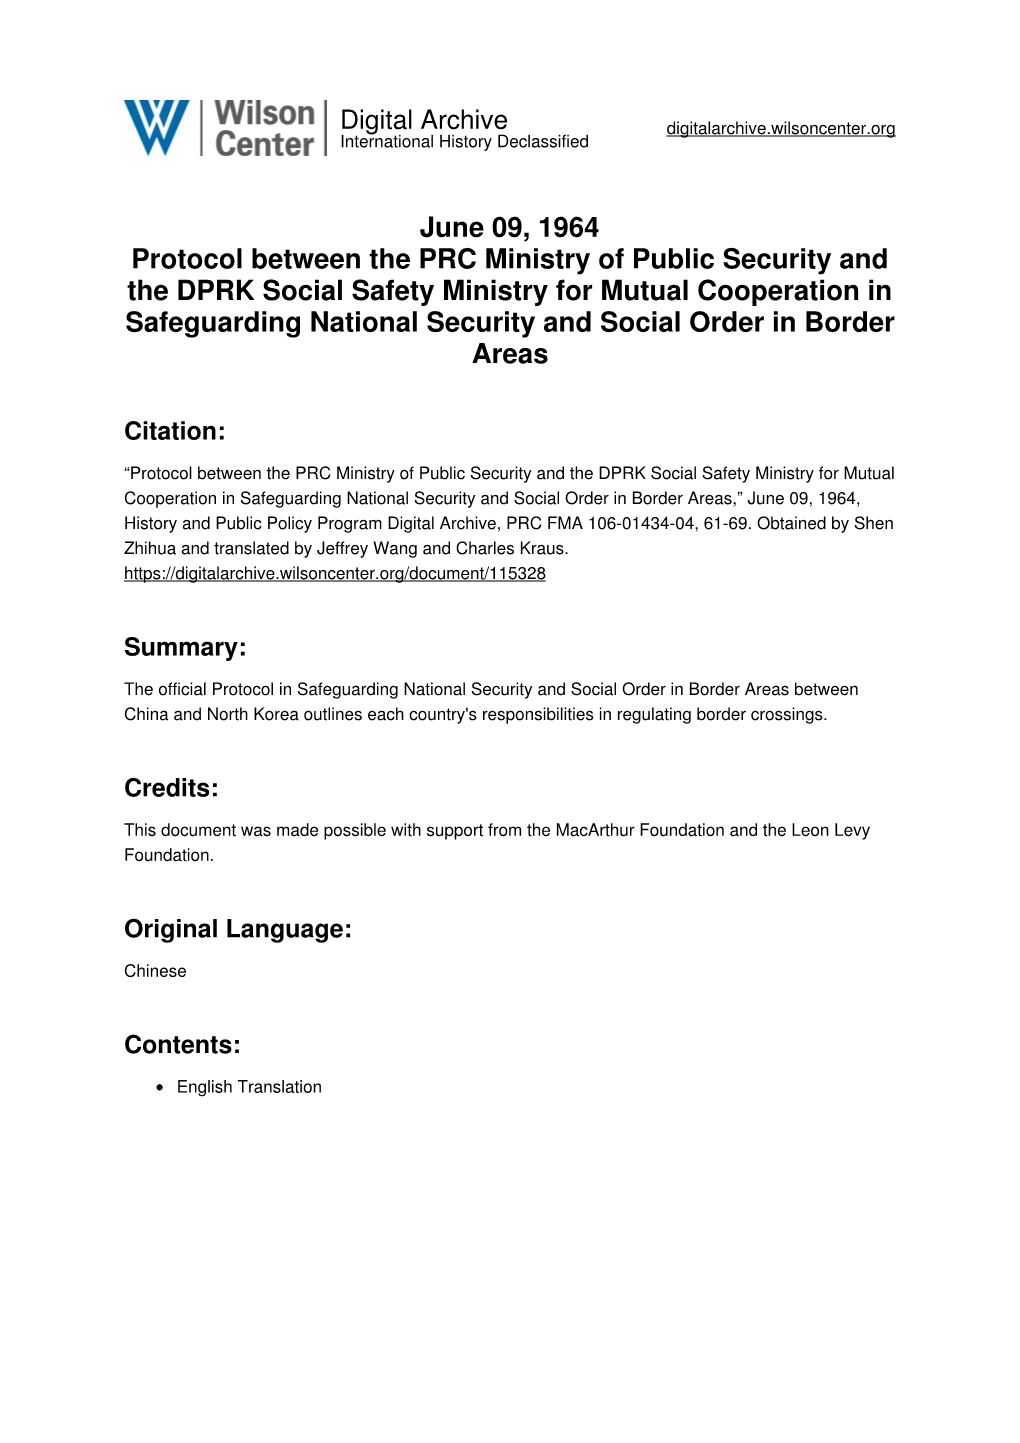 June 09, 1964 Protocol Between the PRC Ministry of Public Security And